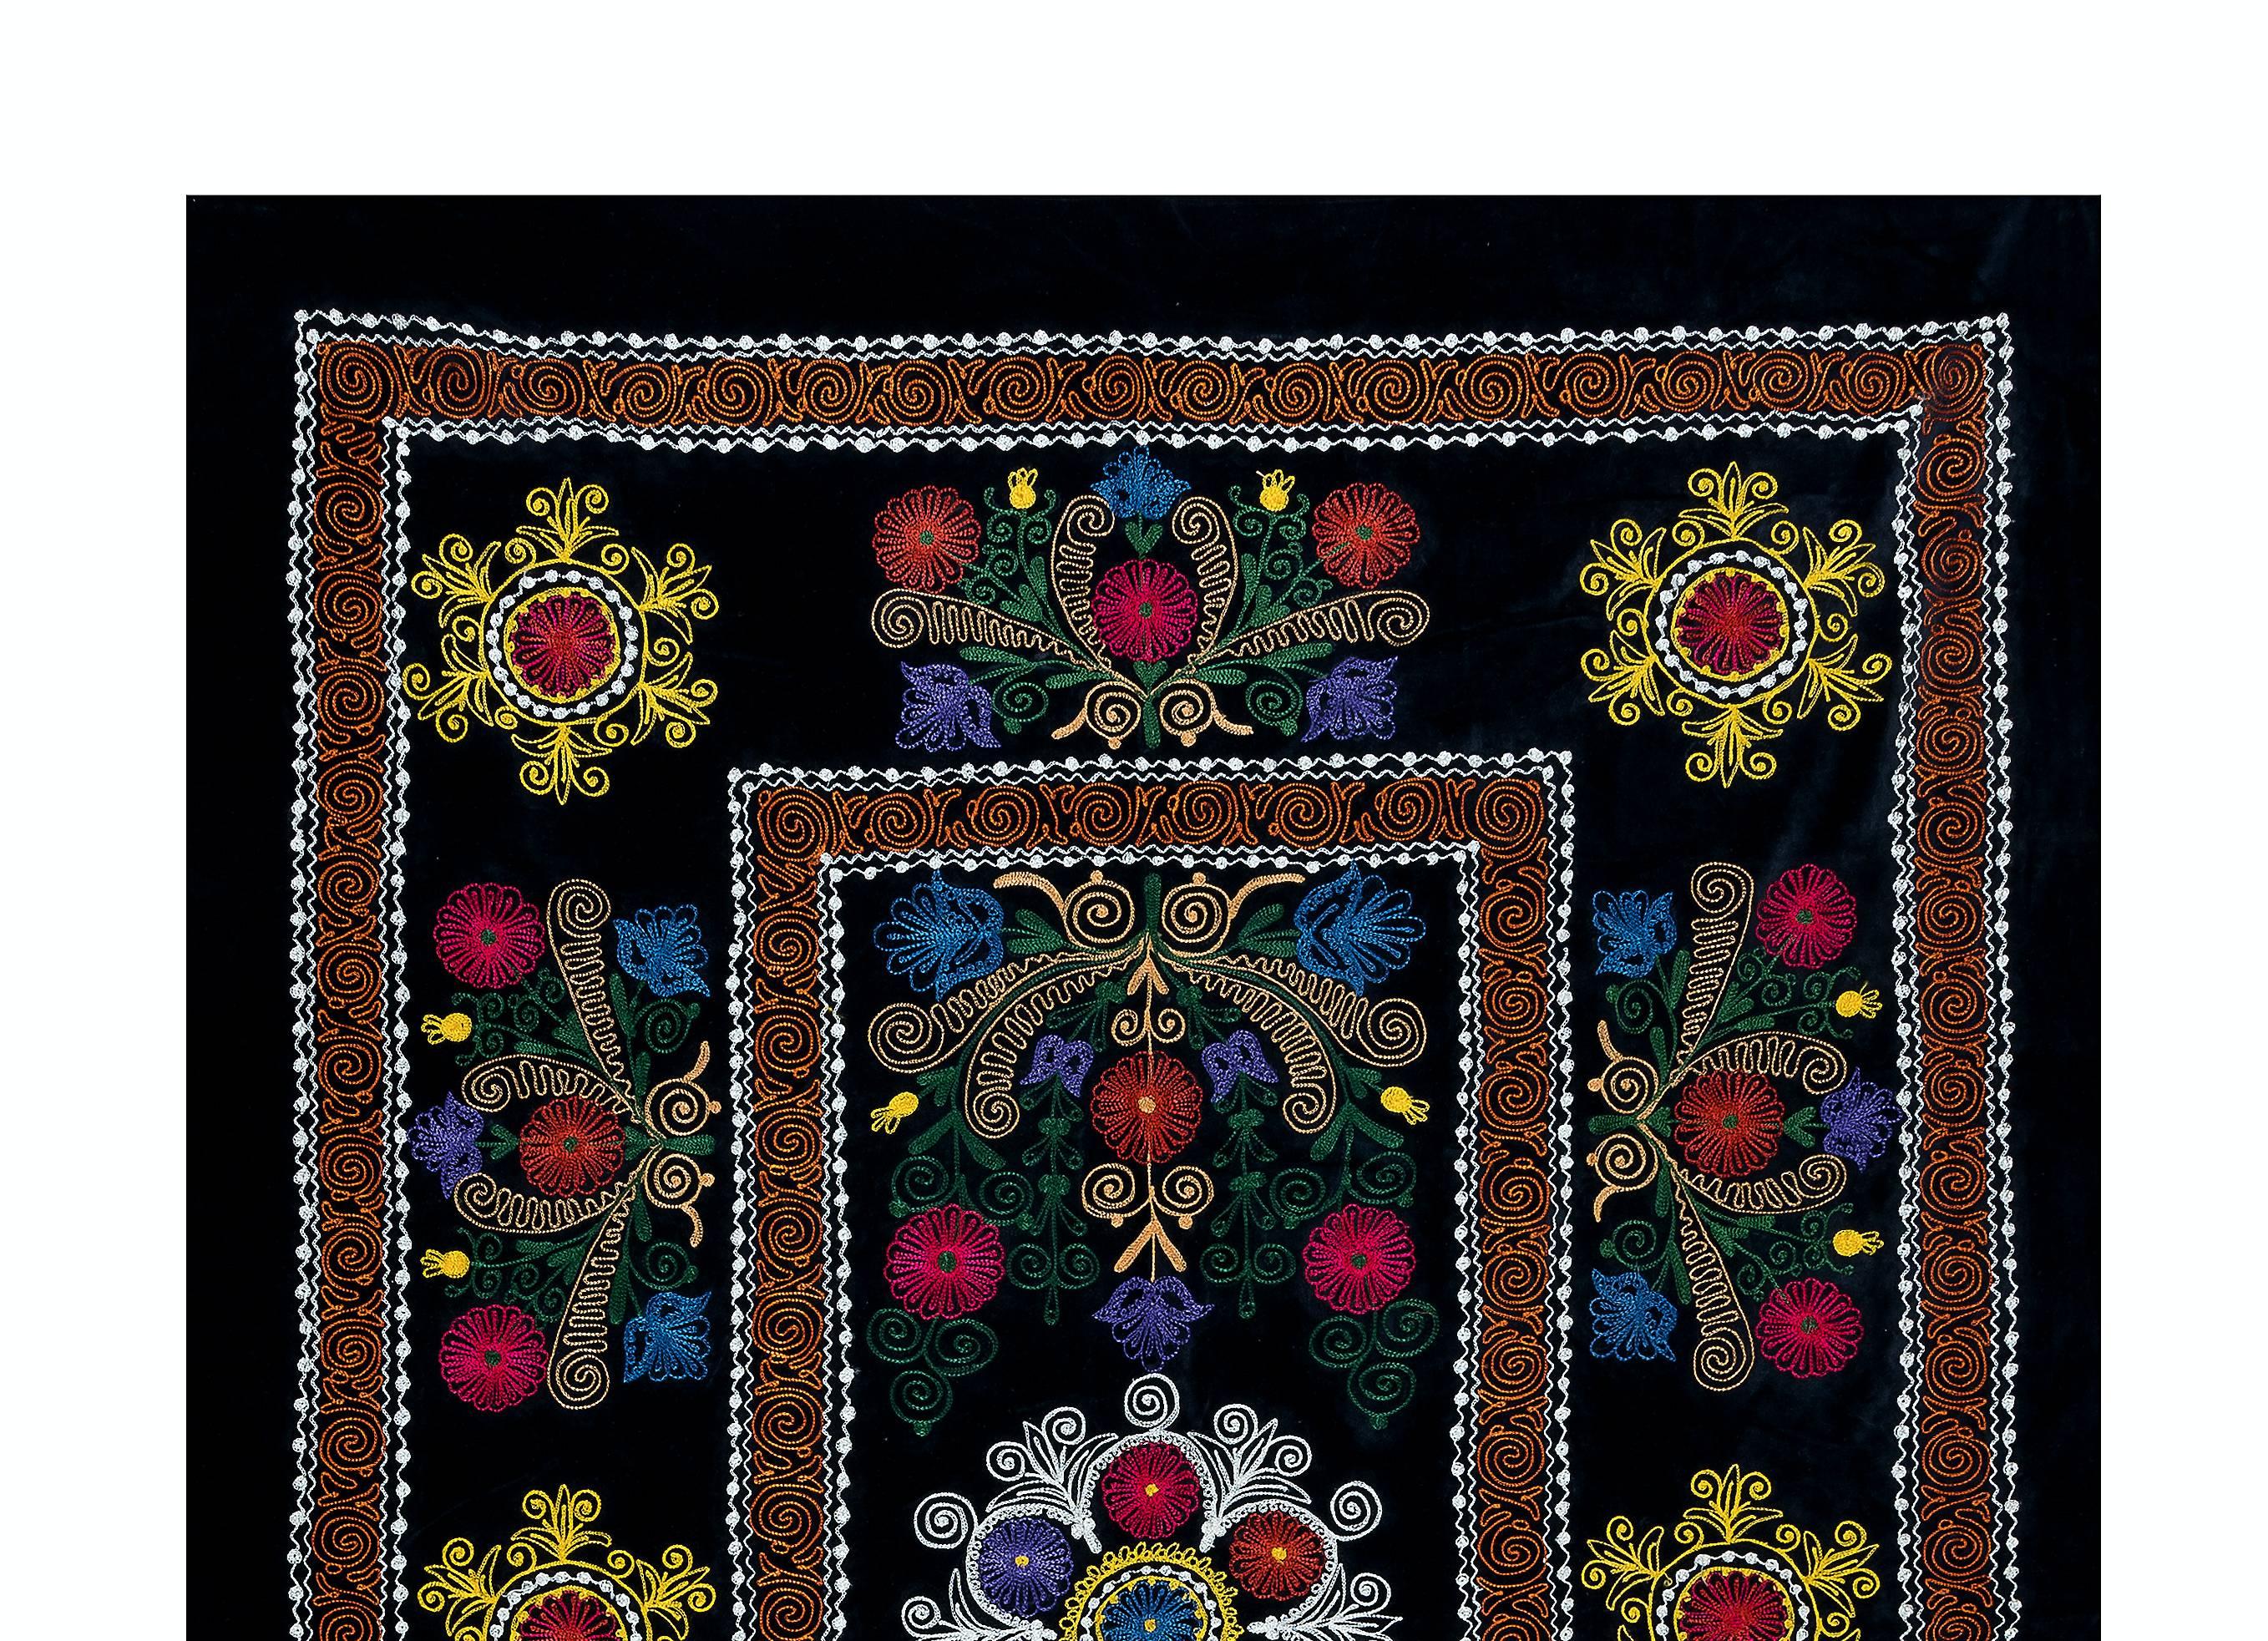 Suzani, a Central Asian term for a specific type of needlework, is also the broader name for the hugely popular decorative pieces of textile that feature this needlework in vivid colors with bold, expressive floral and botanical designs, natural